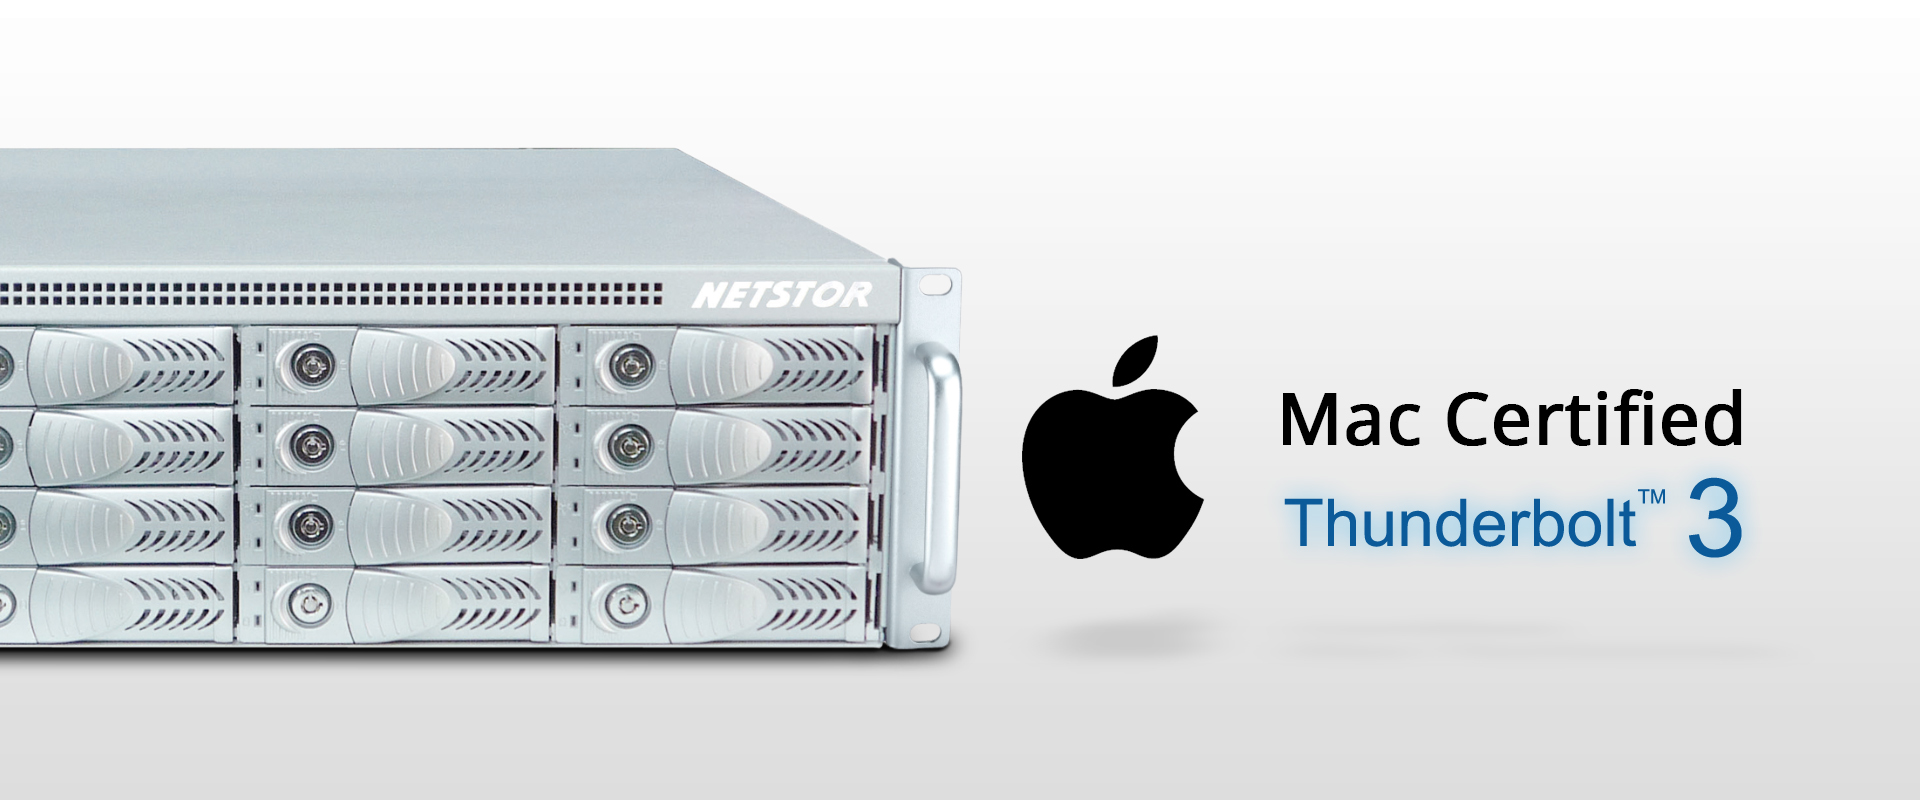 Netstor NA333TB3 has passed Apple's certification test process and is Mac certified.